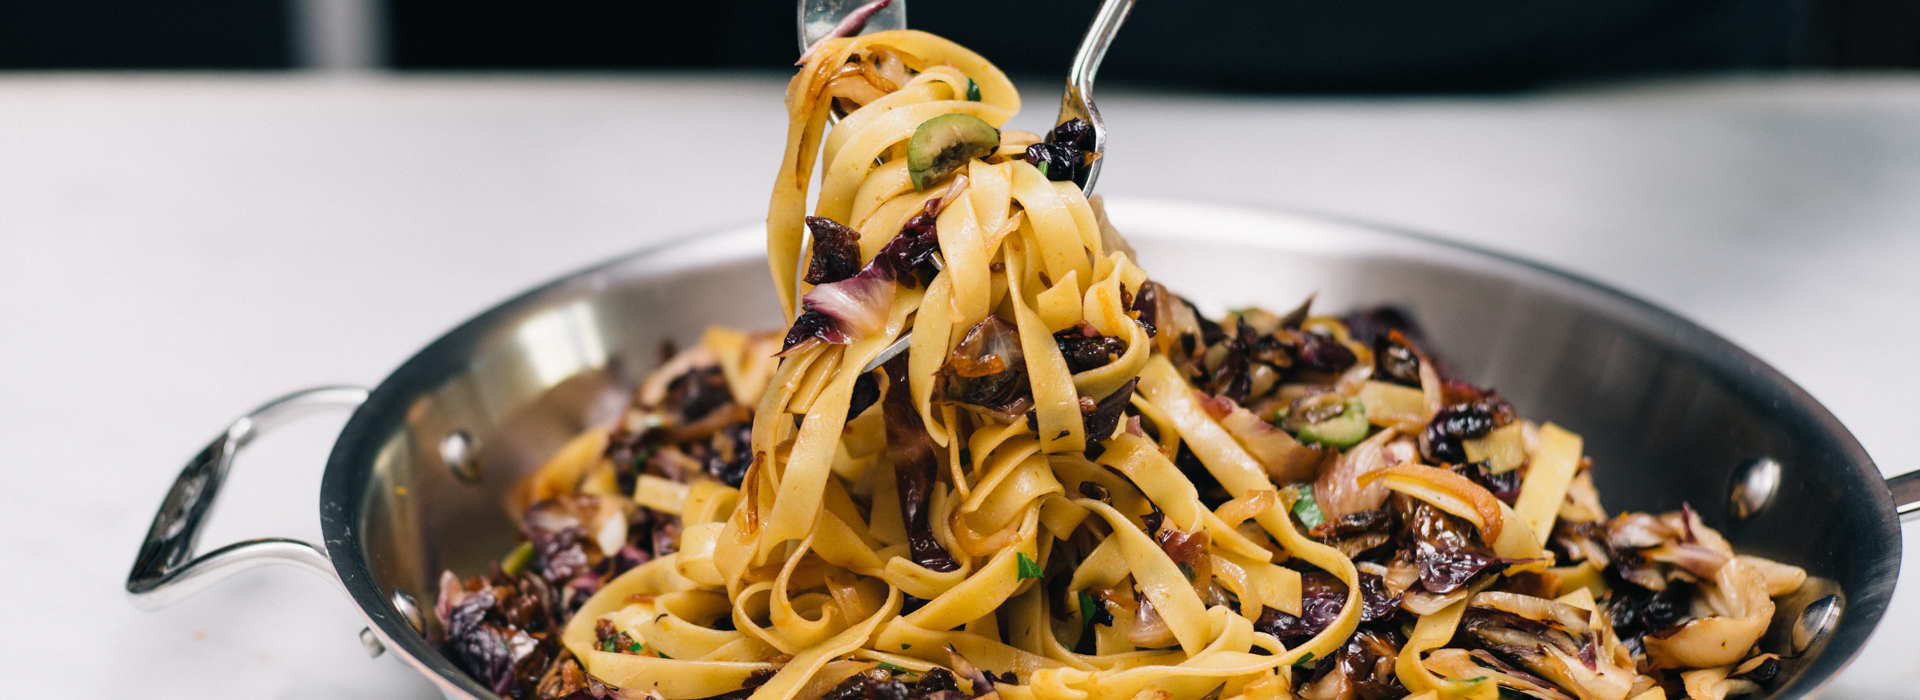 <p>Prune Juice Concentrate adds a rich, sweet note to a simple pan sauce made with bacon and orange zest that inspired this winter-ready pasta. The same recipe pairs well with the nutty flavors of whole-wheat pasta, too.</p>
